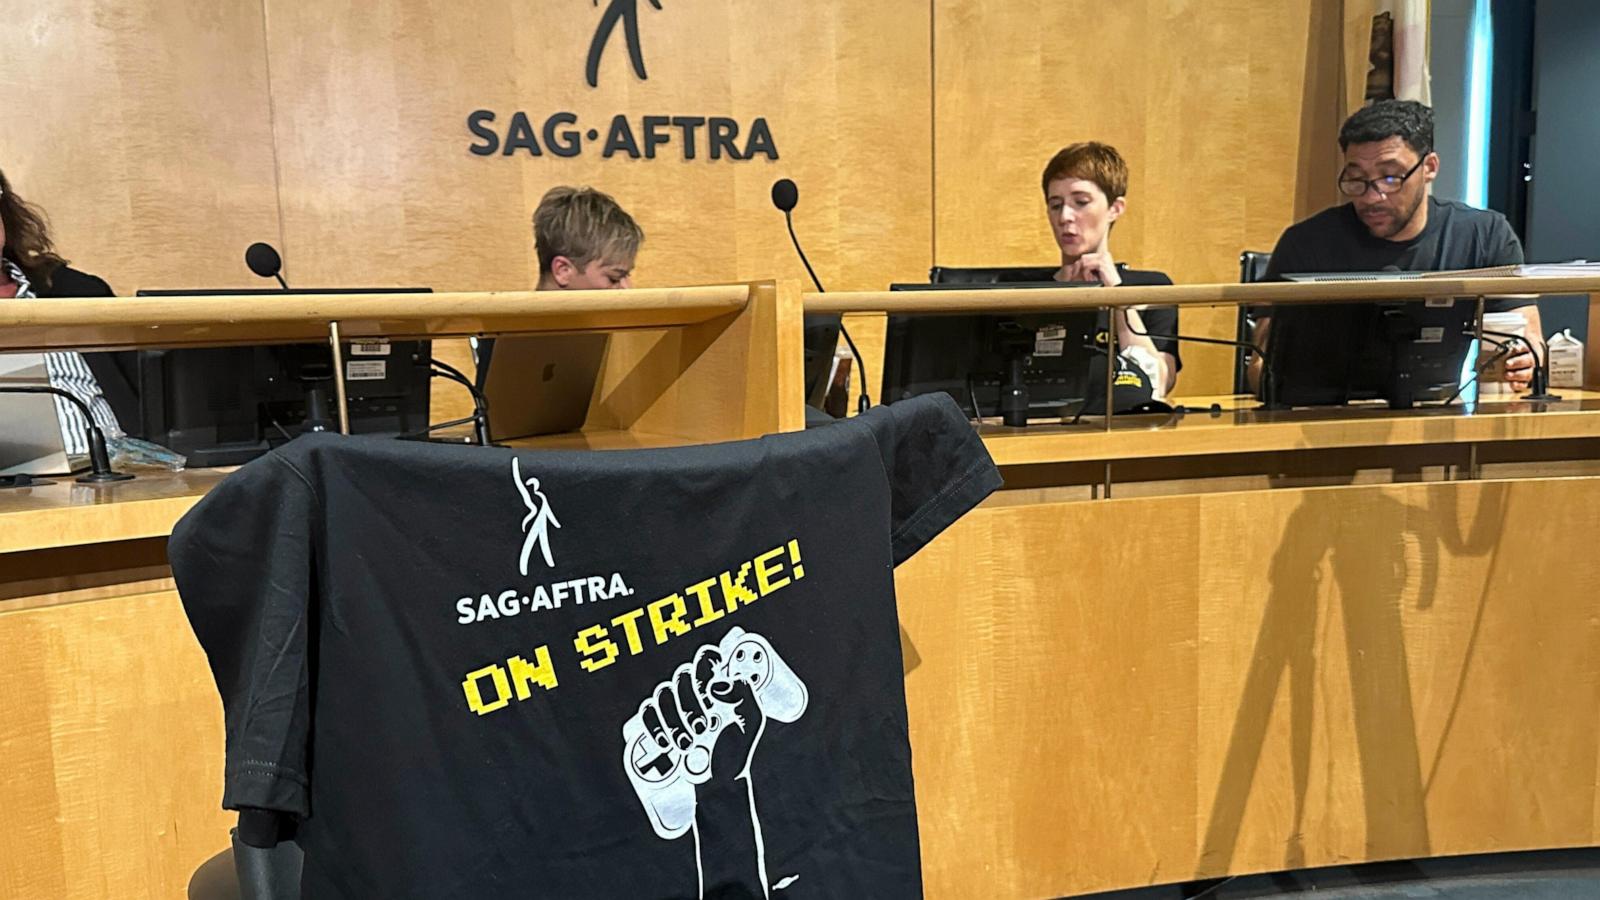 abcnews.go.com -  SARAH PARVINI AP Technology Writer - Video game actors are now on strike. Here's why